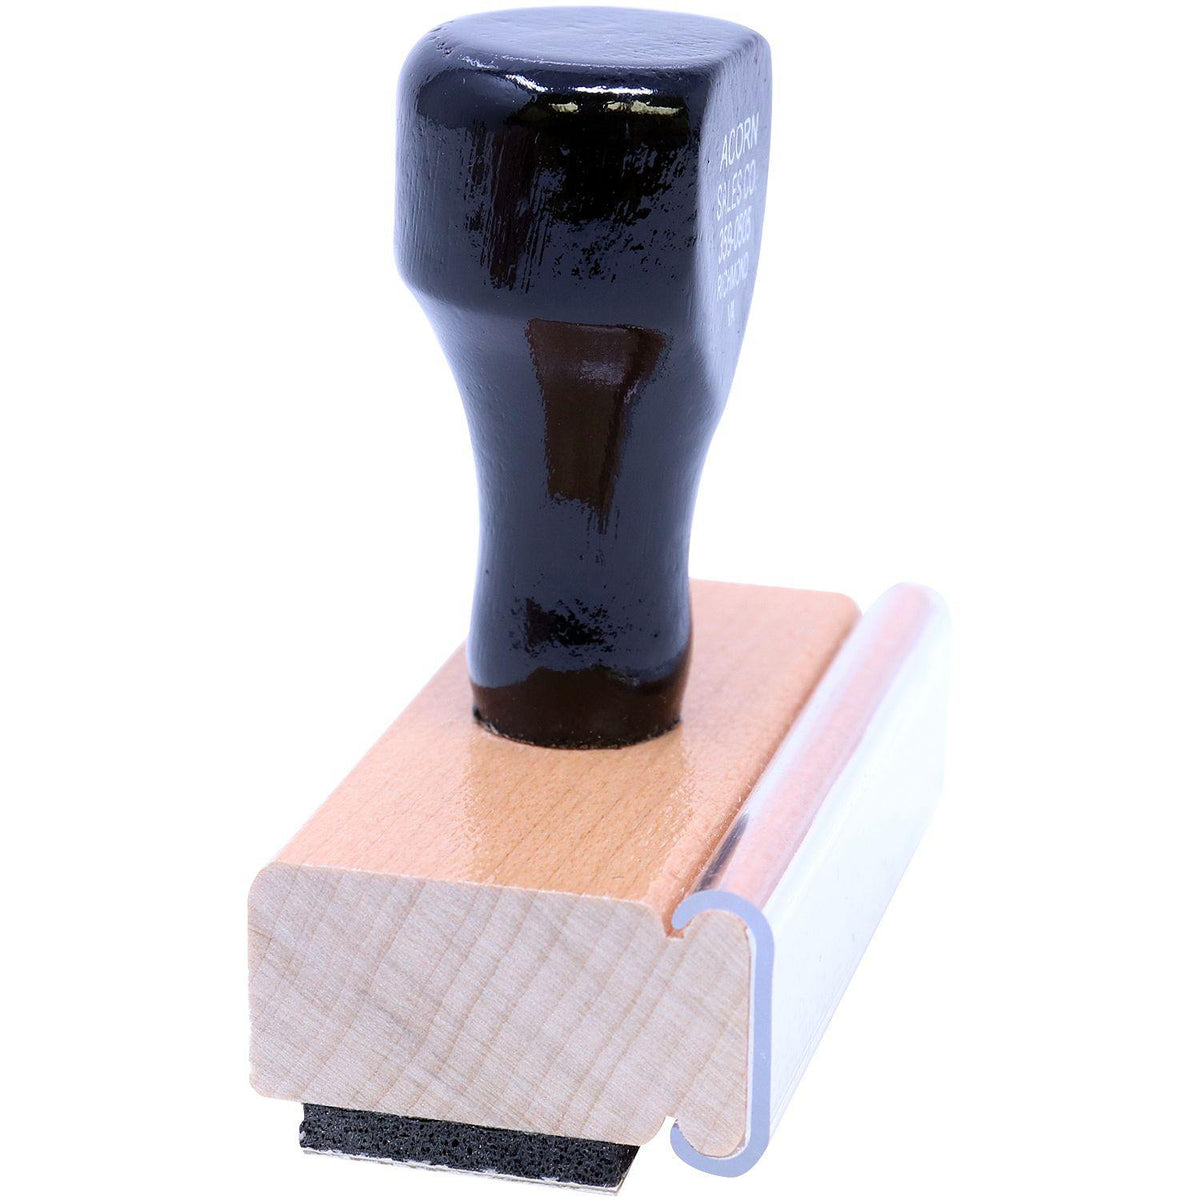 Large Urgente Rubber Stamp - Engineer Seal Stamps - Brand_Acorn, Impression Size_Large, Stamp Type_Regular Stamp, Type of Use_Office, Type of Use_Shipping &amp; Receiving